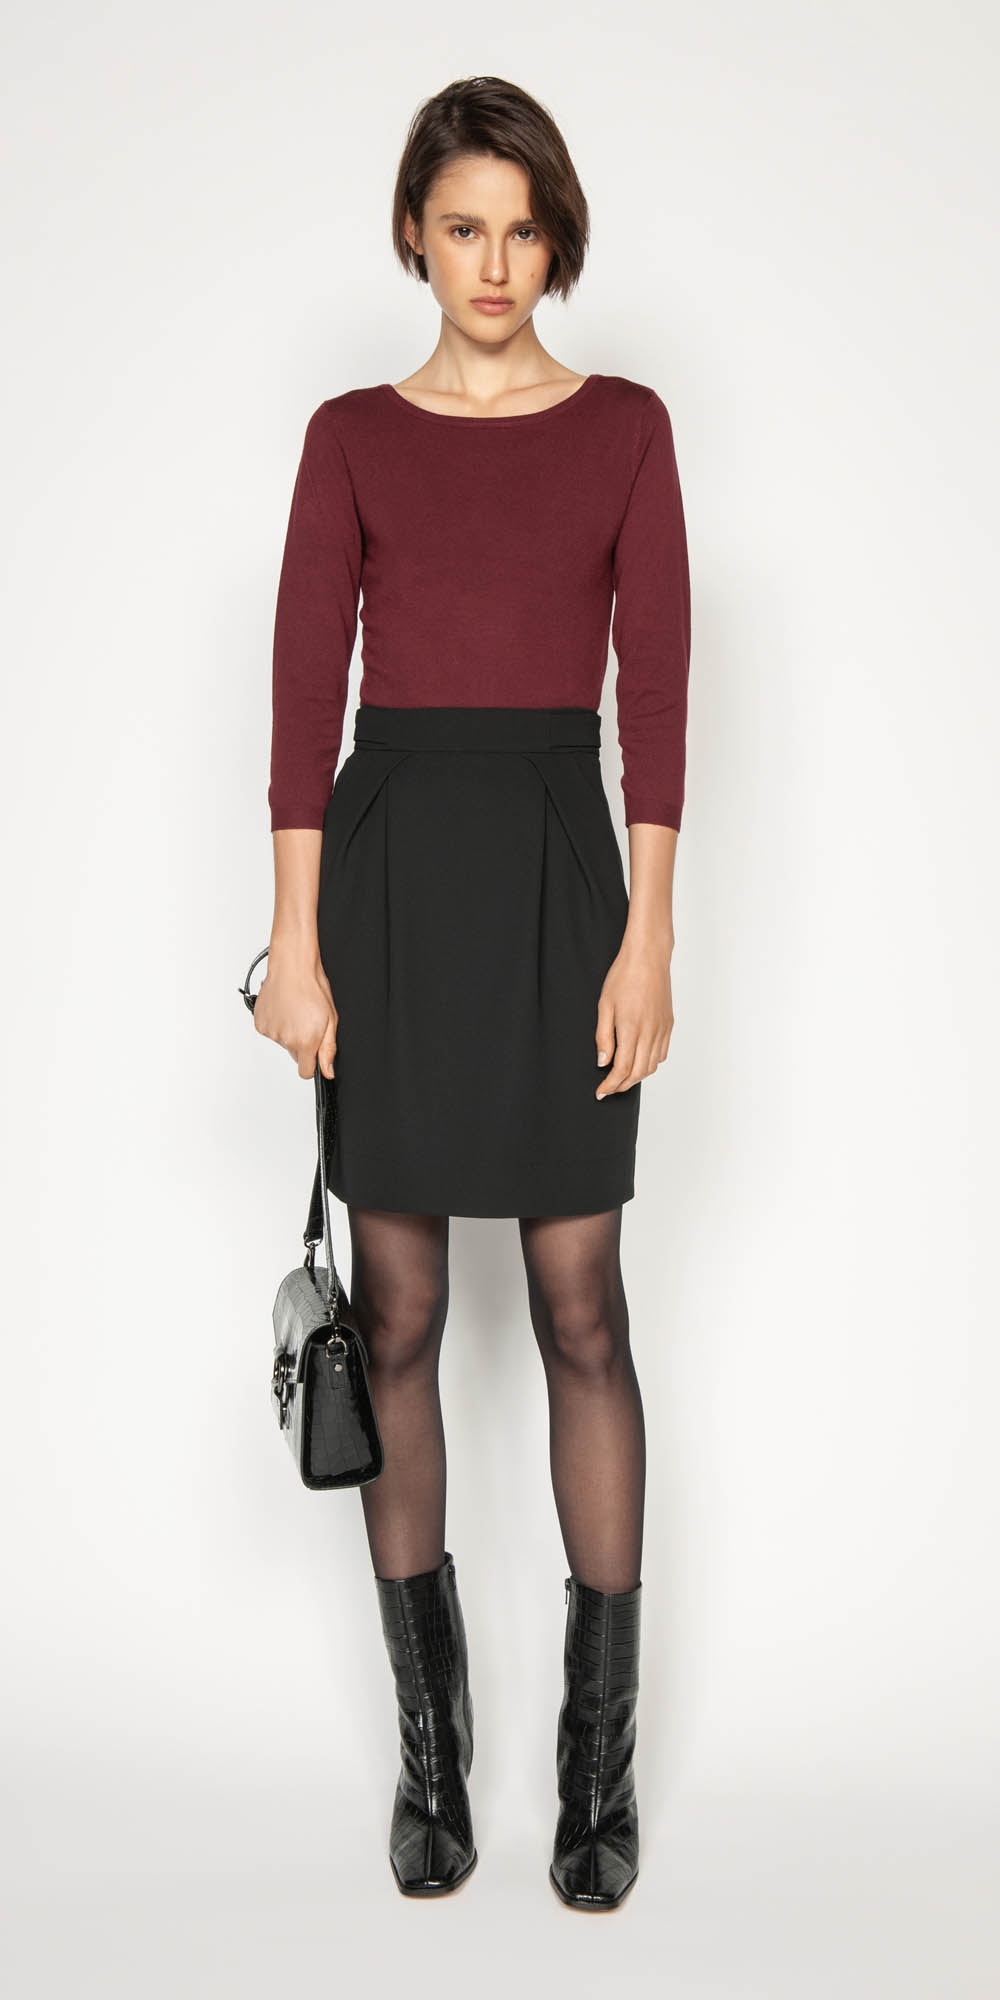 Tuck Front Tulip Skirt | Buy Skirts Online - Cue